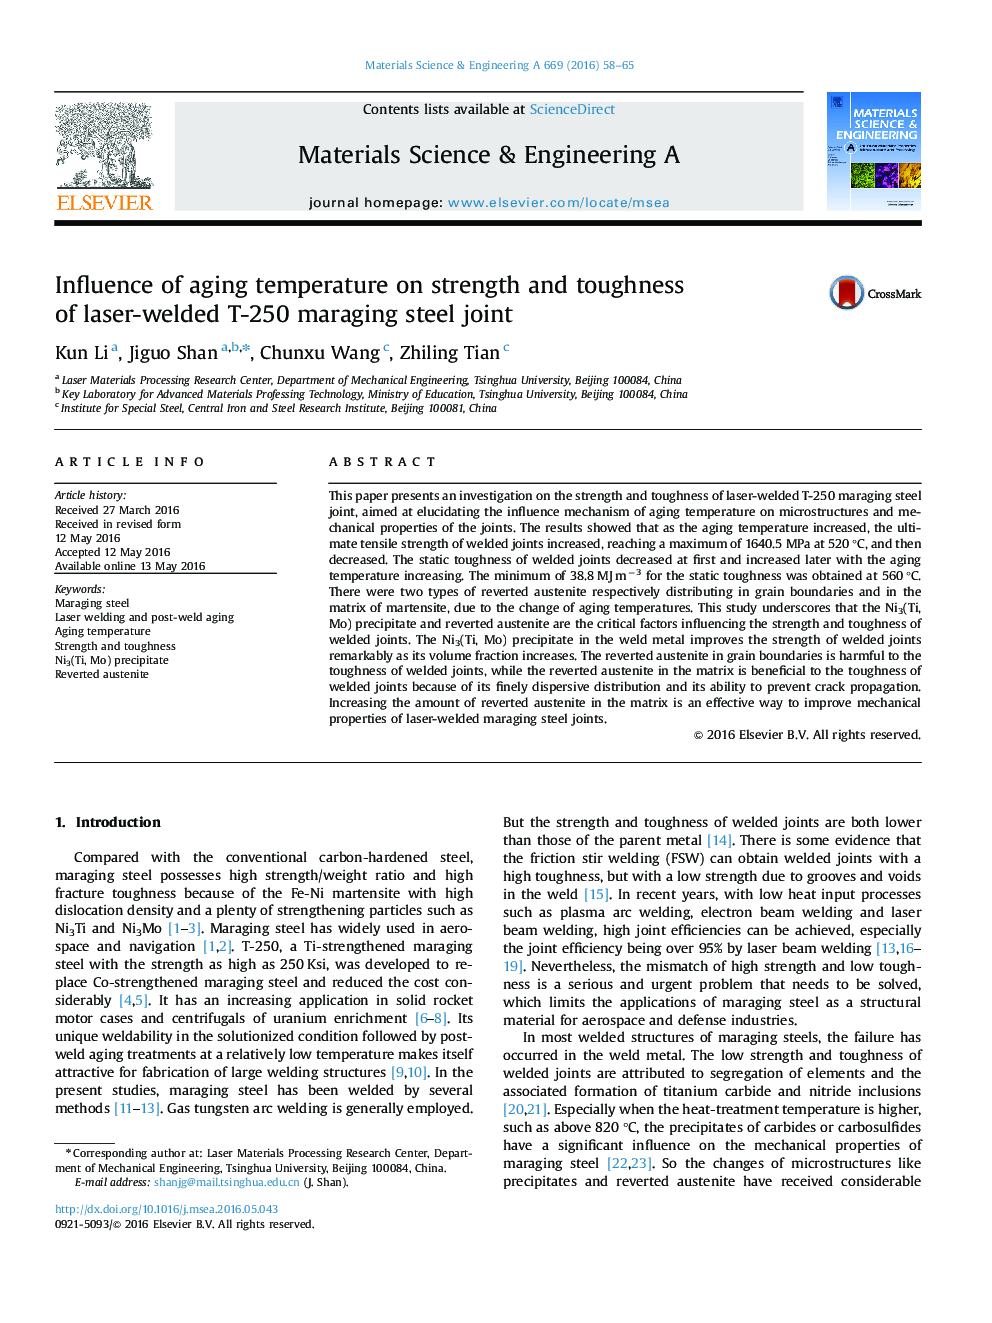 Influence of aging temperature on strength and toughness of laser-welded T-250 maraging steel joint